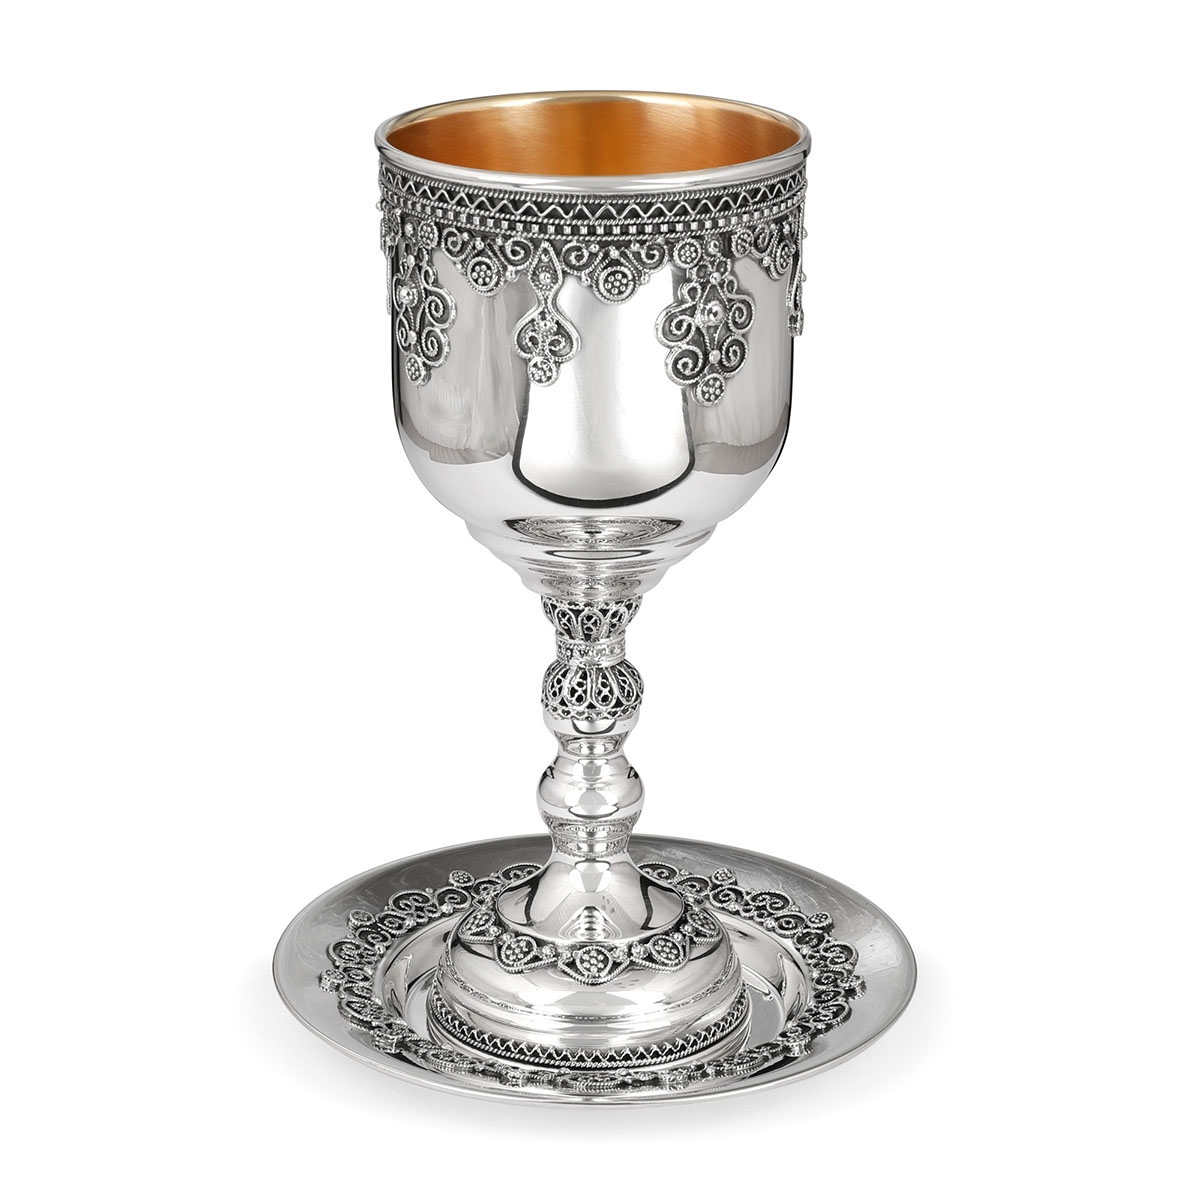 Traditional Yemenite Art Handcrafted Sterling Silver Kiddush Cup With Refined Ornamental Design - 1